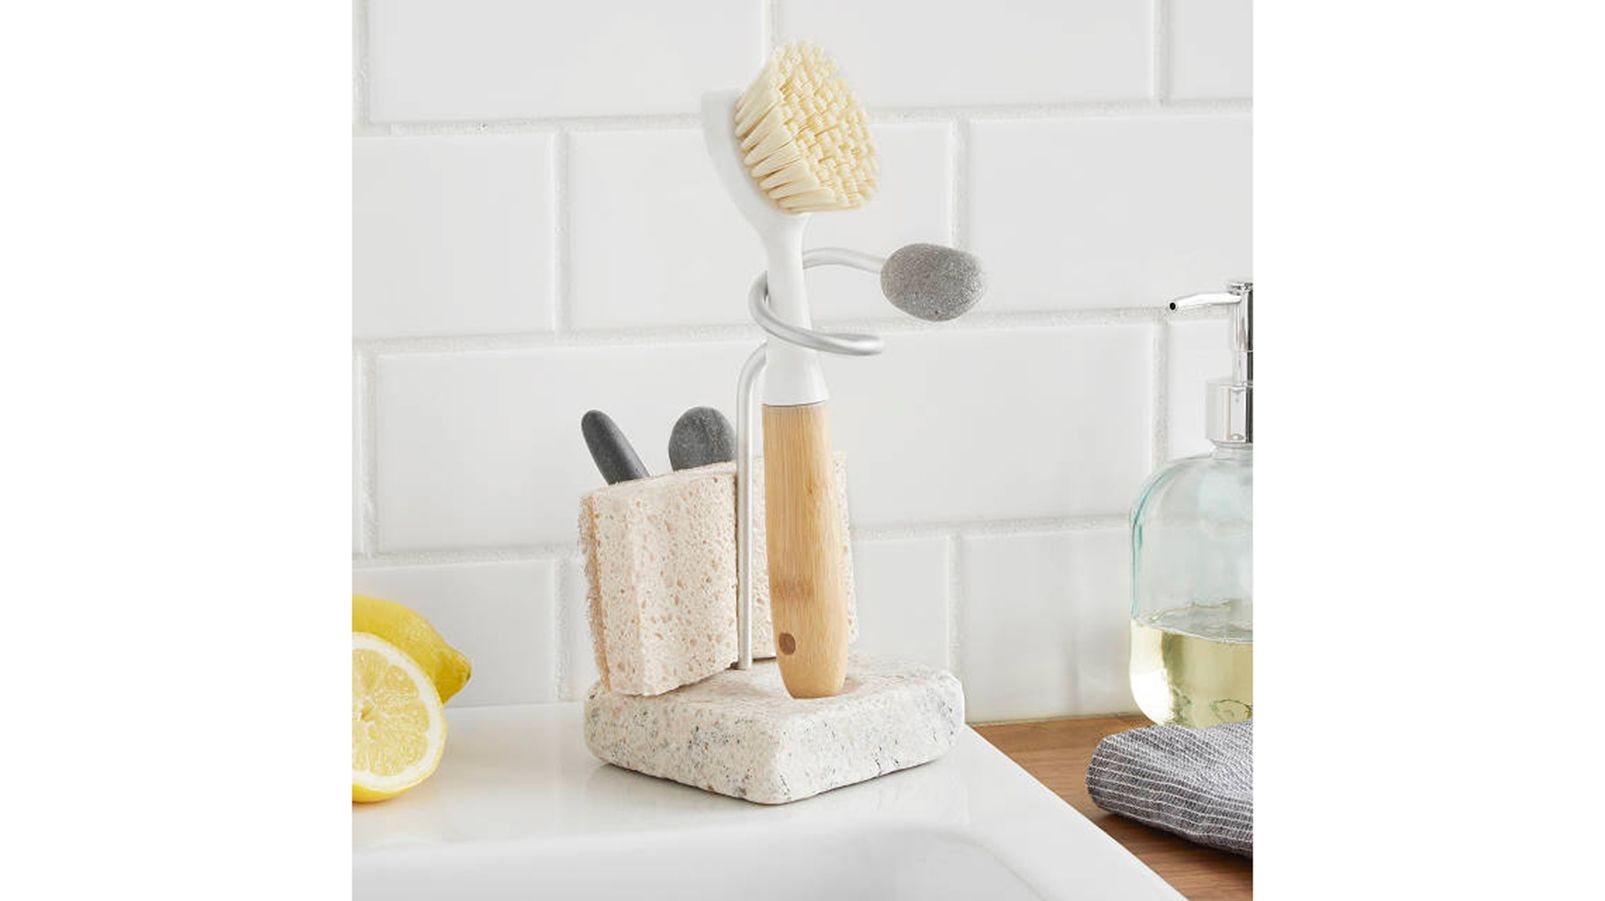 This 'Clever' Cleaning Brush Set Makes Doing Dishes Easier According to  Shoppers